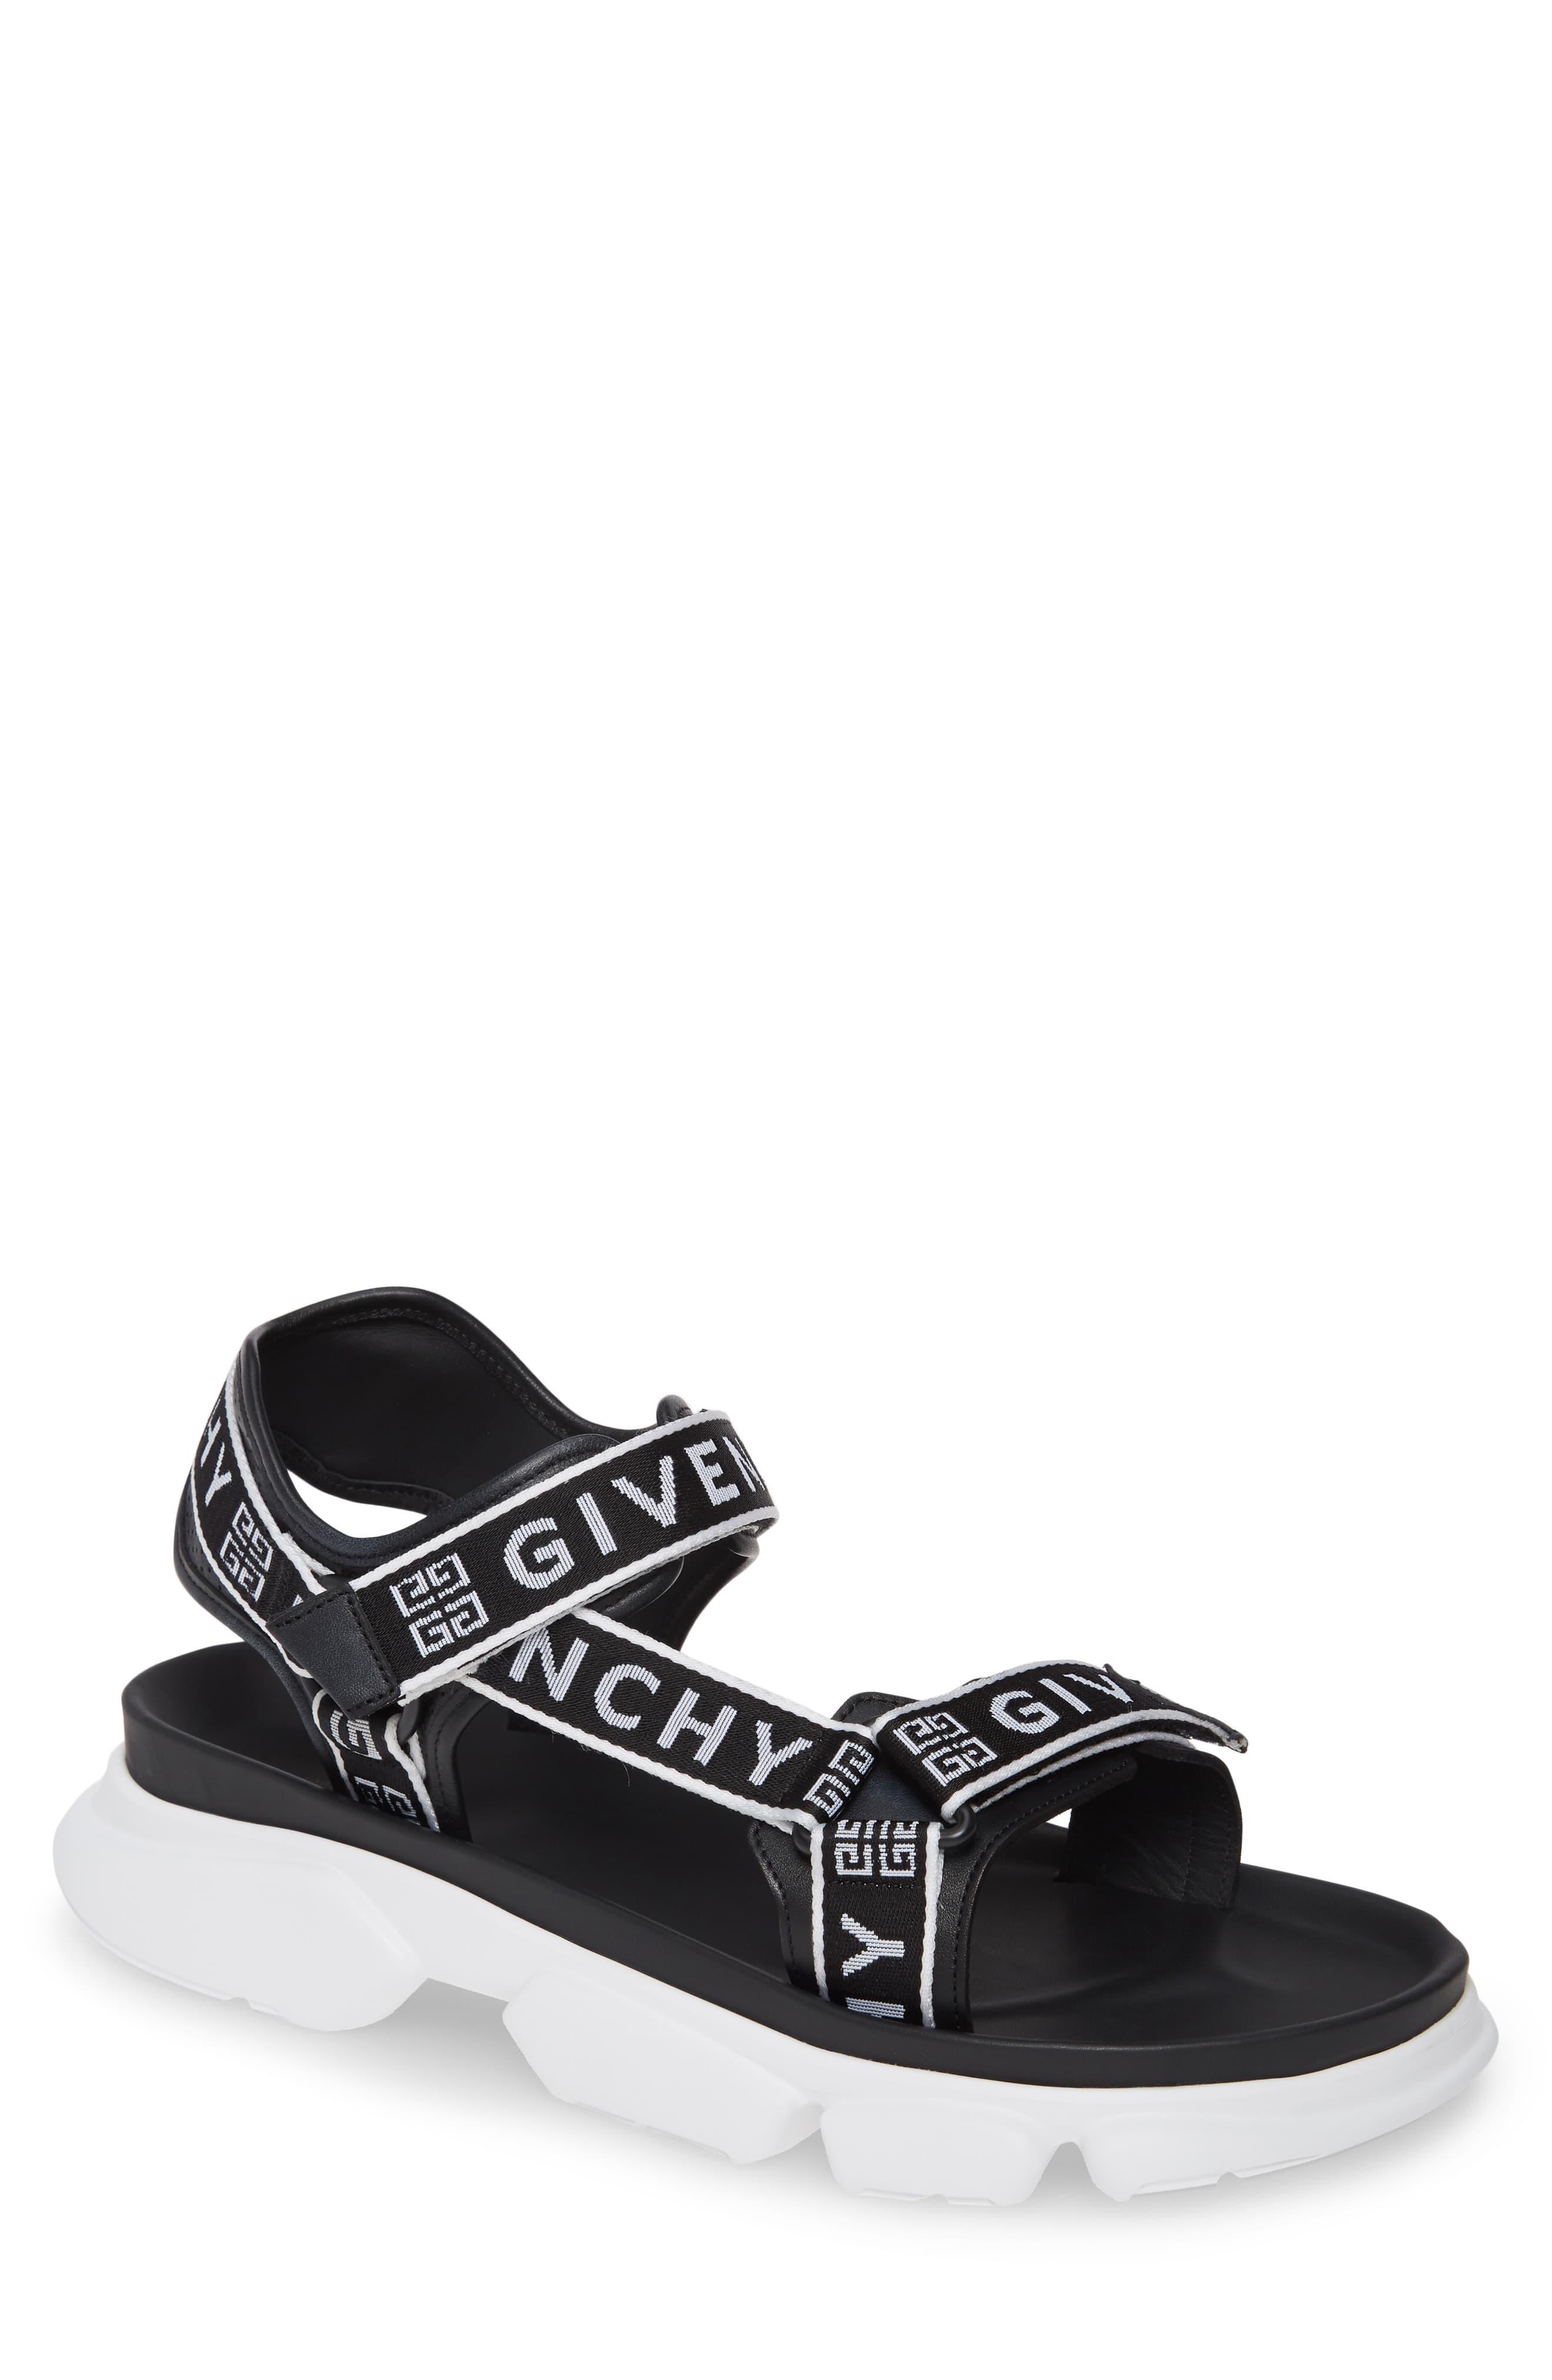 Givenchy Jaw Sandals in Black/White (Black) for Men - Lyst